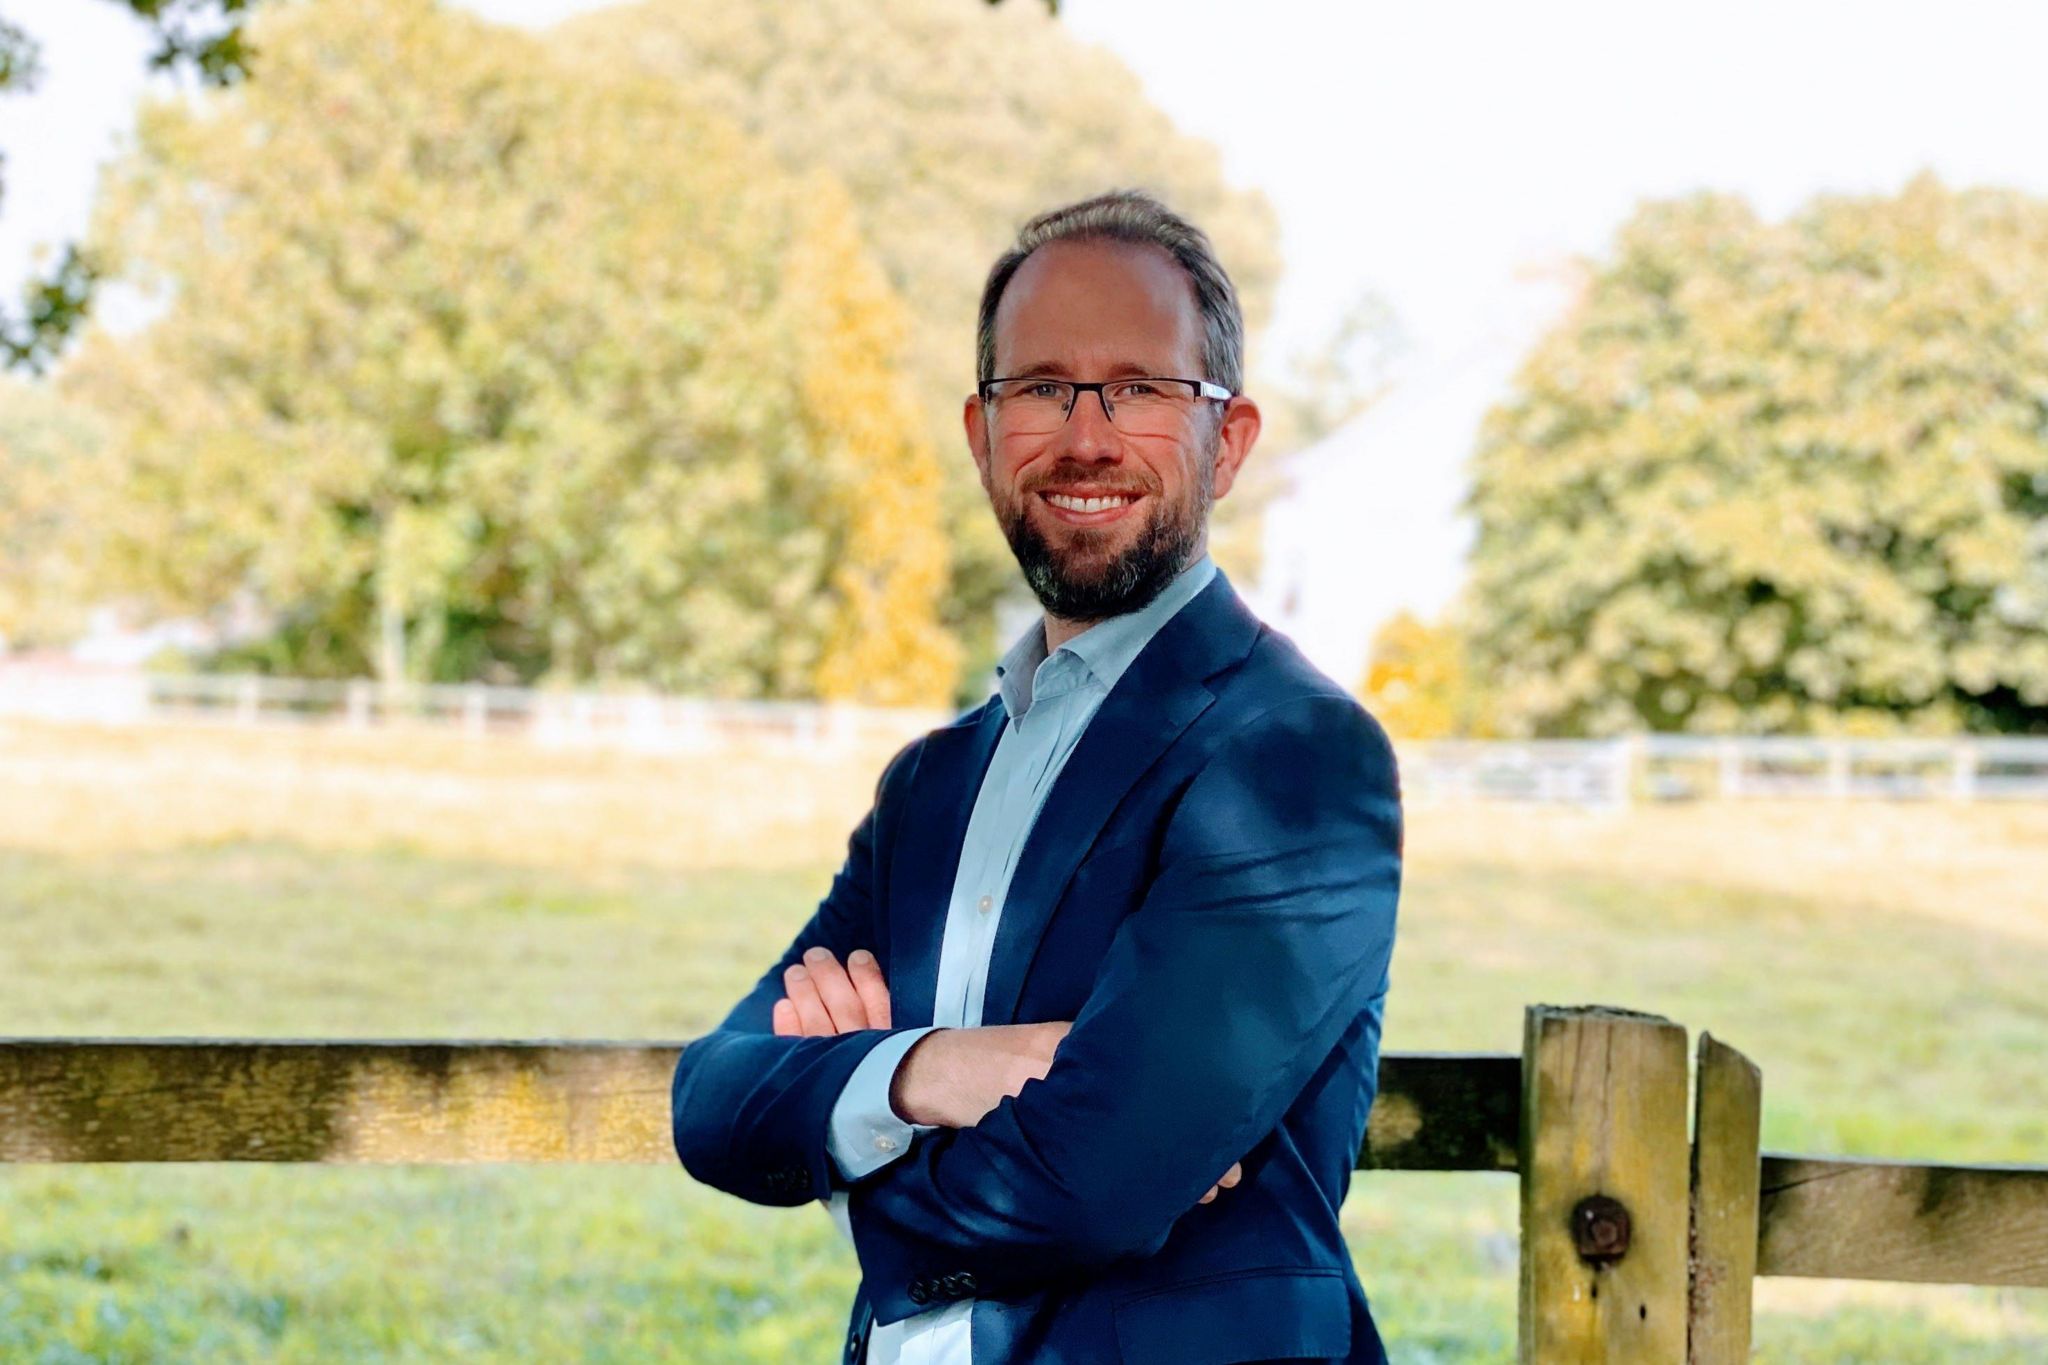 Conservative candidate Matthew Barber standing in front of a wooden fence, with a field in the background